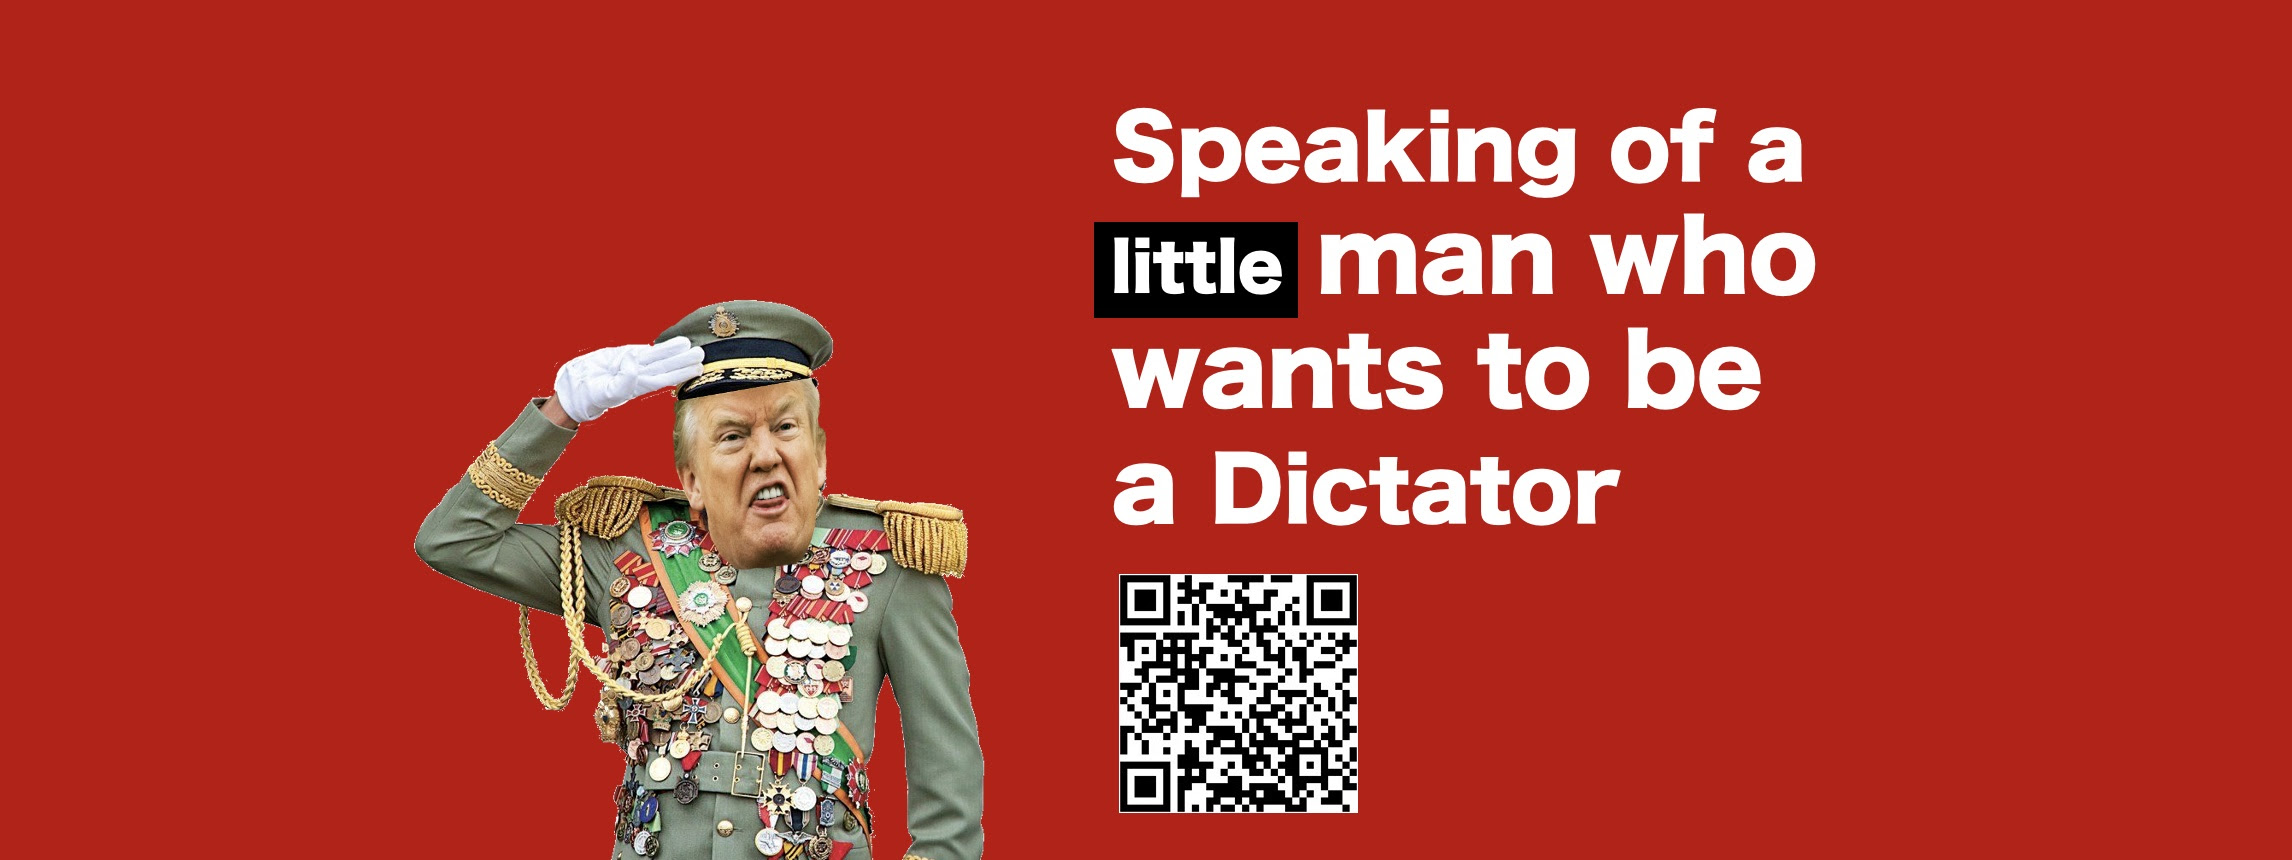 Speaking of a little man who wants to be a dictator